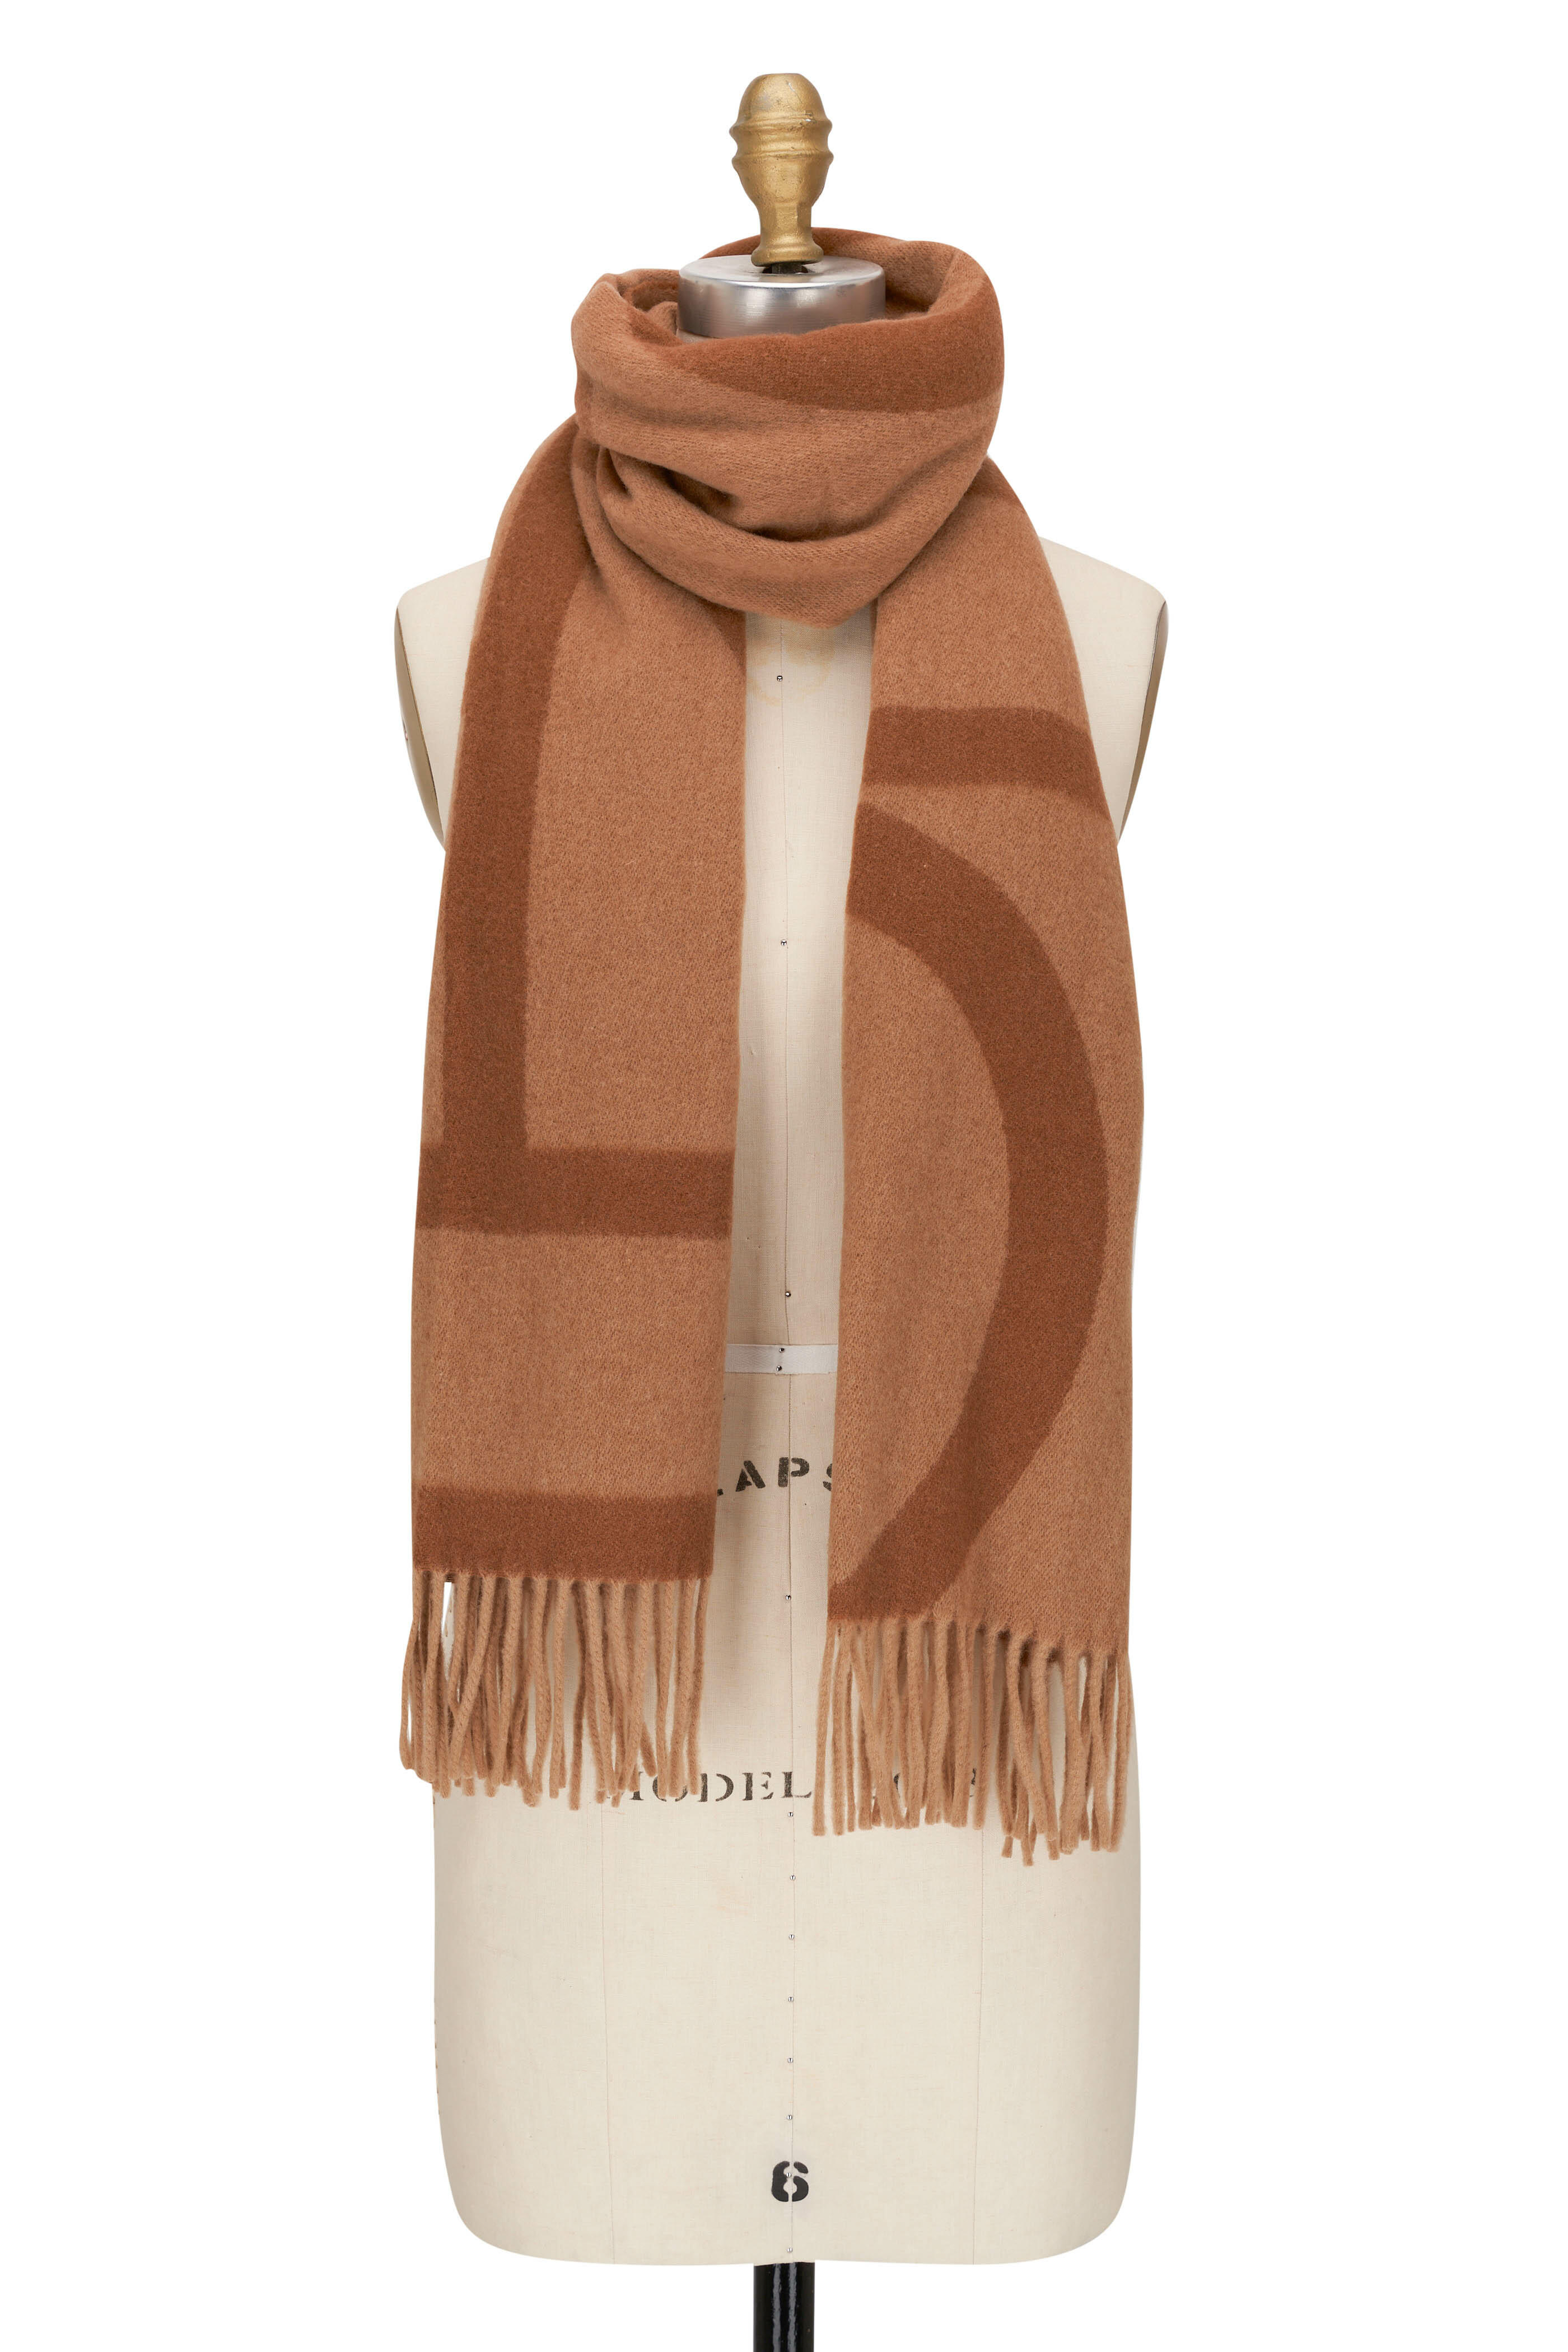 Monogram Wool And Cashmere Scarf in White - Toteme